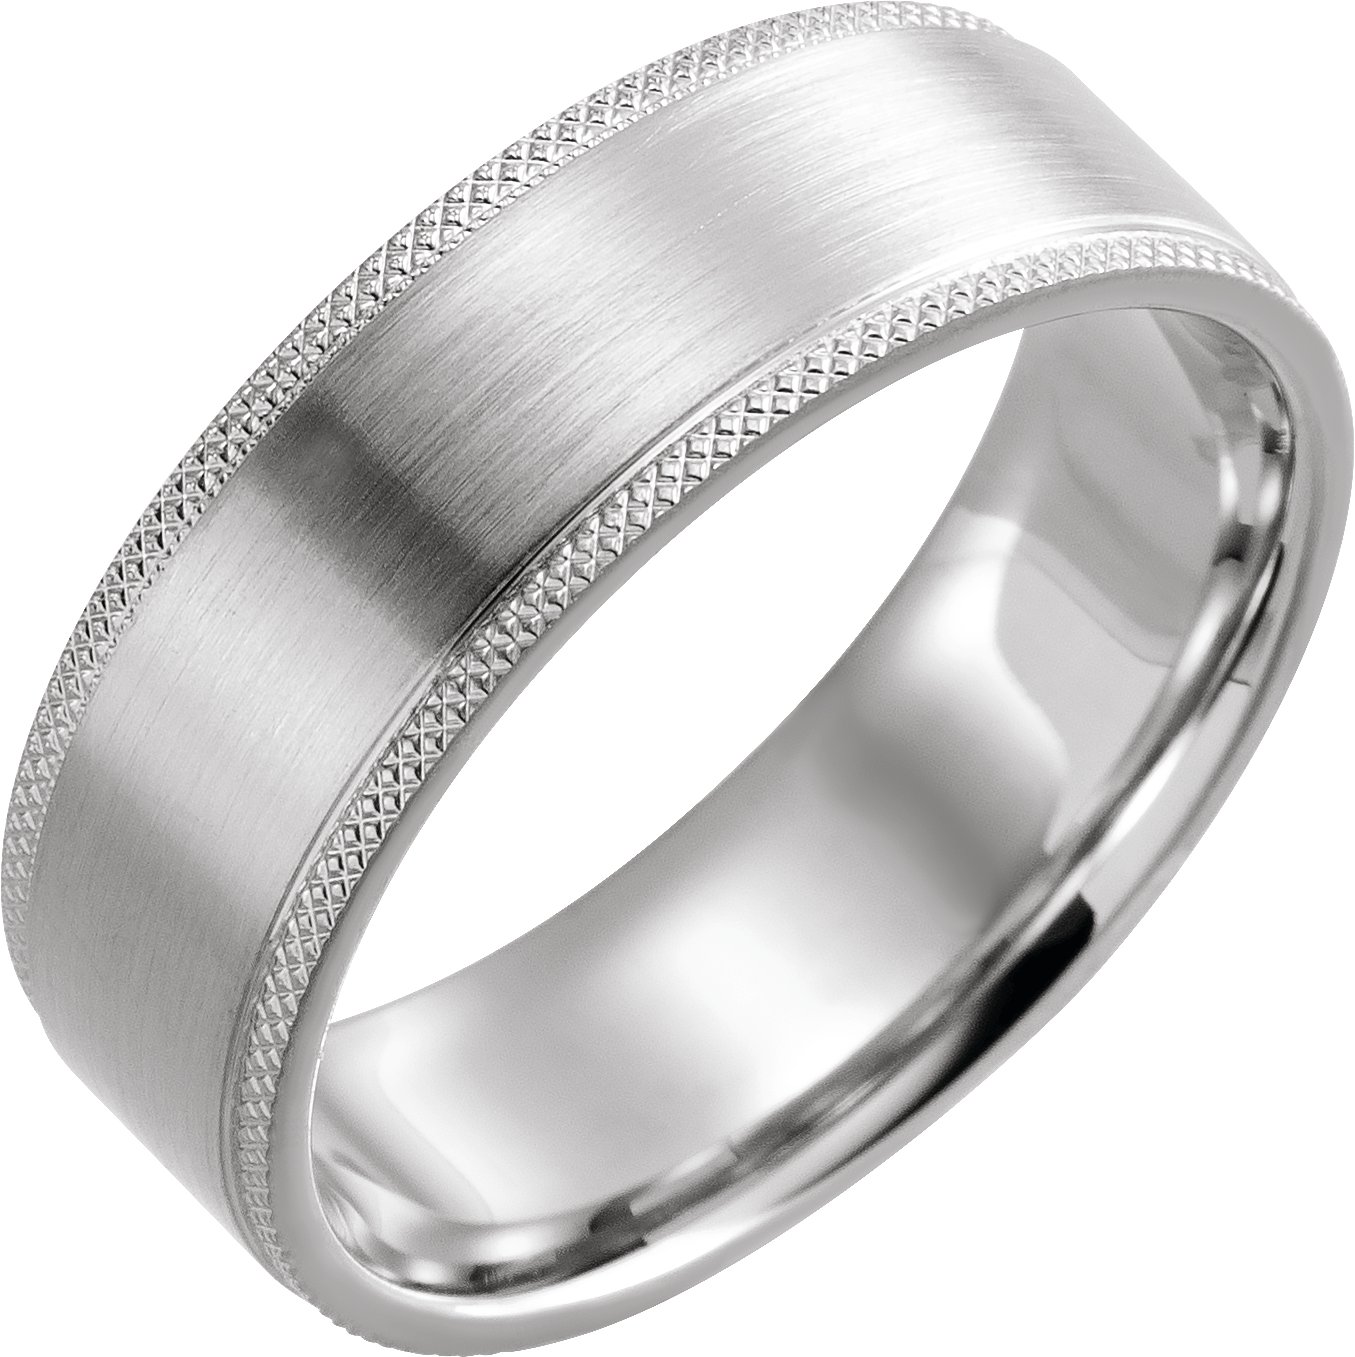 Sterling Silver 7 mm Flat Knurled Edge Band with Satin Finish Size 17.5 Ref 16532073